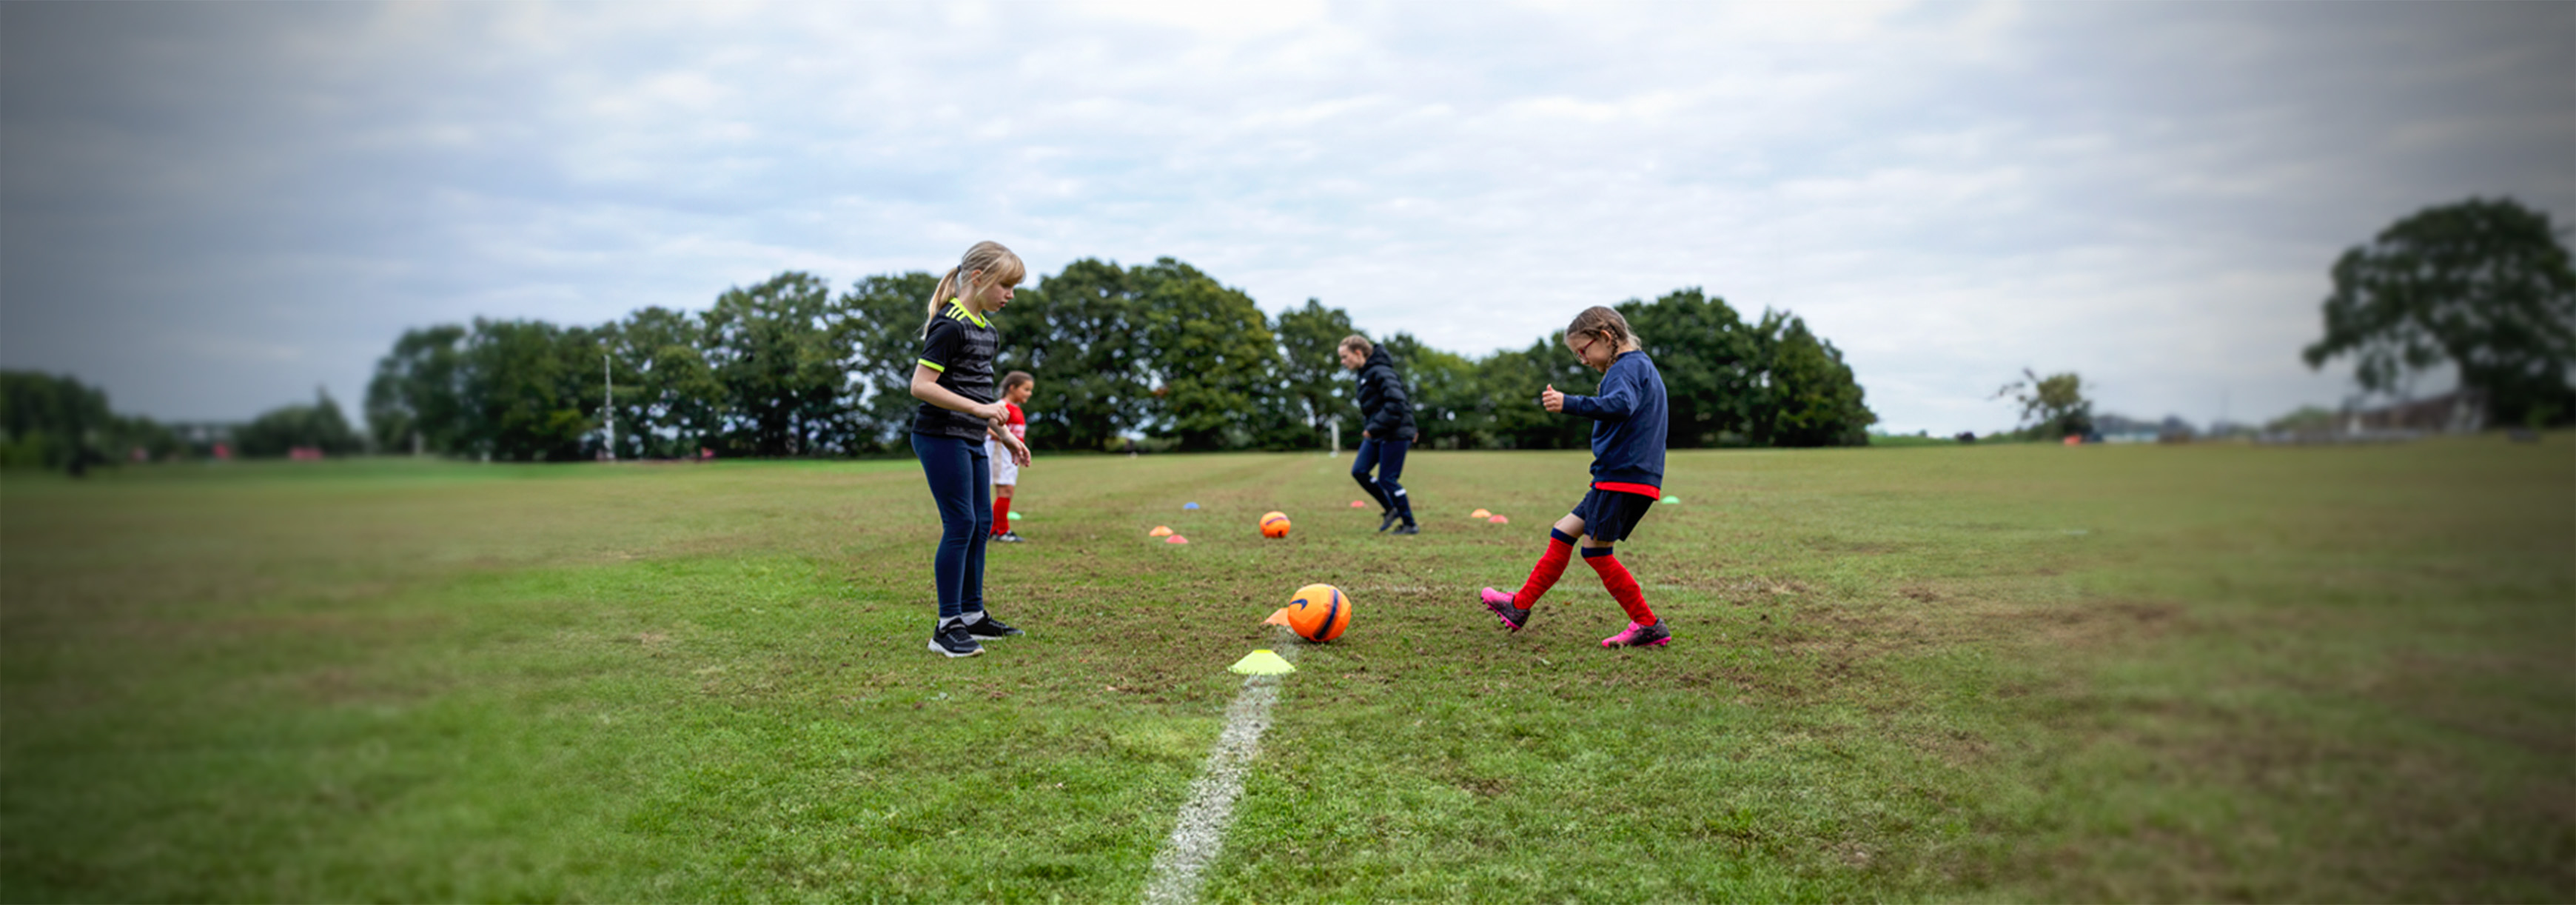 Two children face each other and kick a ball to each other between cones